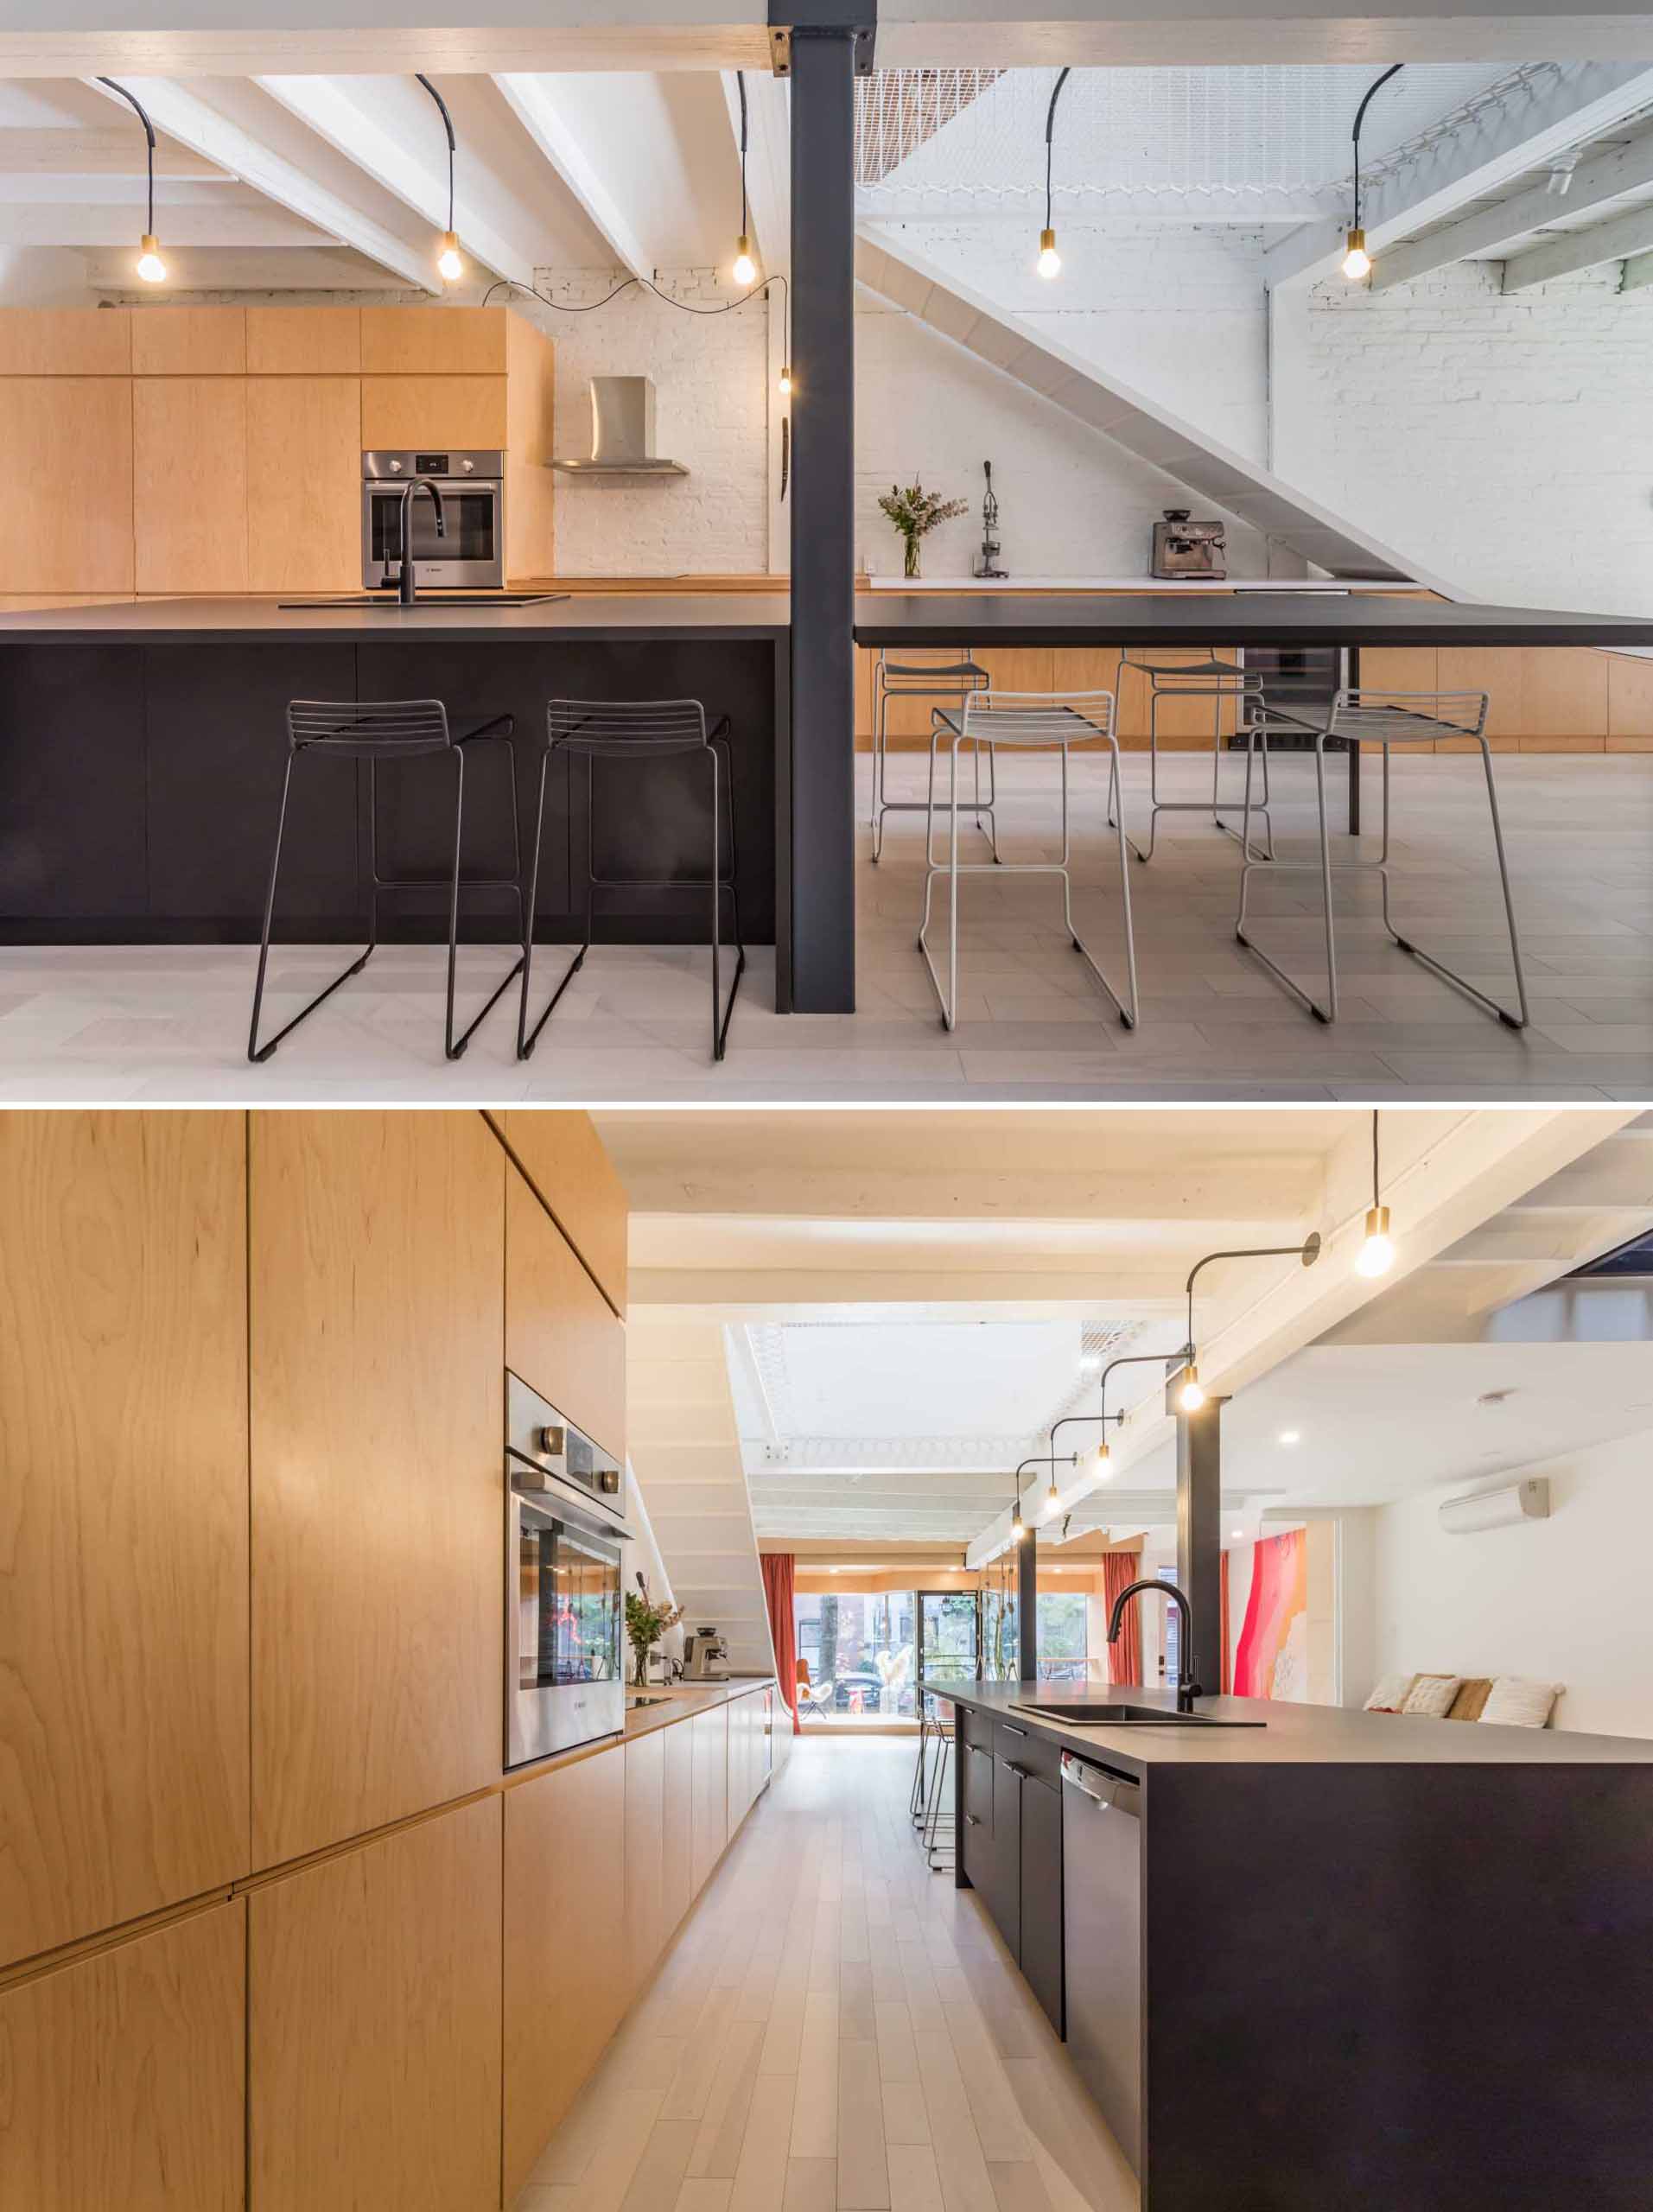 The open-plan interior of the social areas of the ،me also includes the dining area and kitchen, where wood and black cabinetry and countertops have been paired for a contemporary appearance.